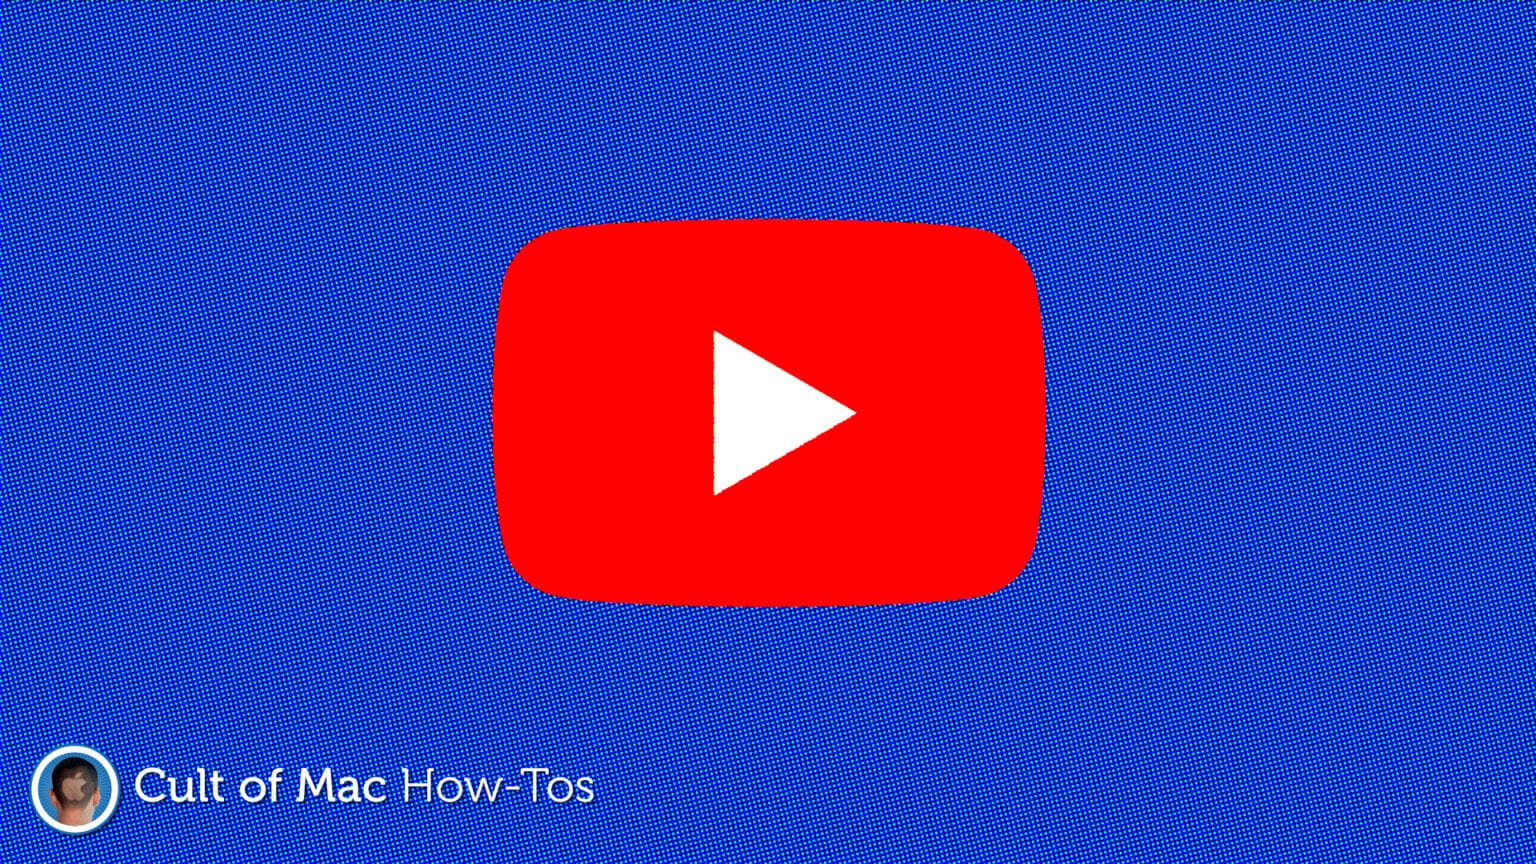 See how much time you've wasted watching YouTube videos [Pro tip]